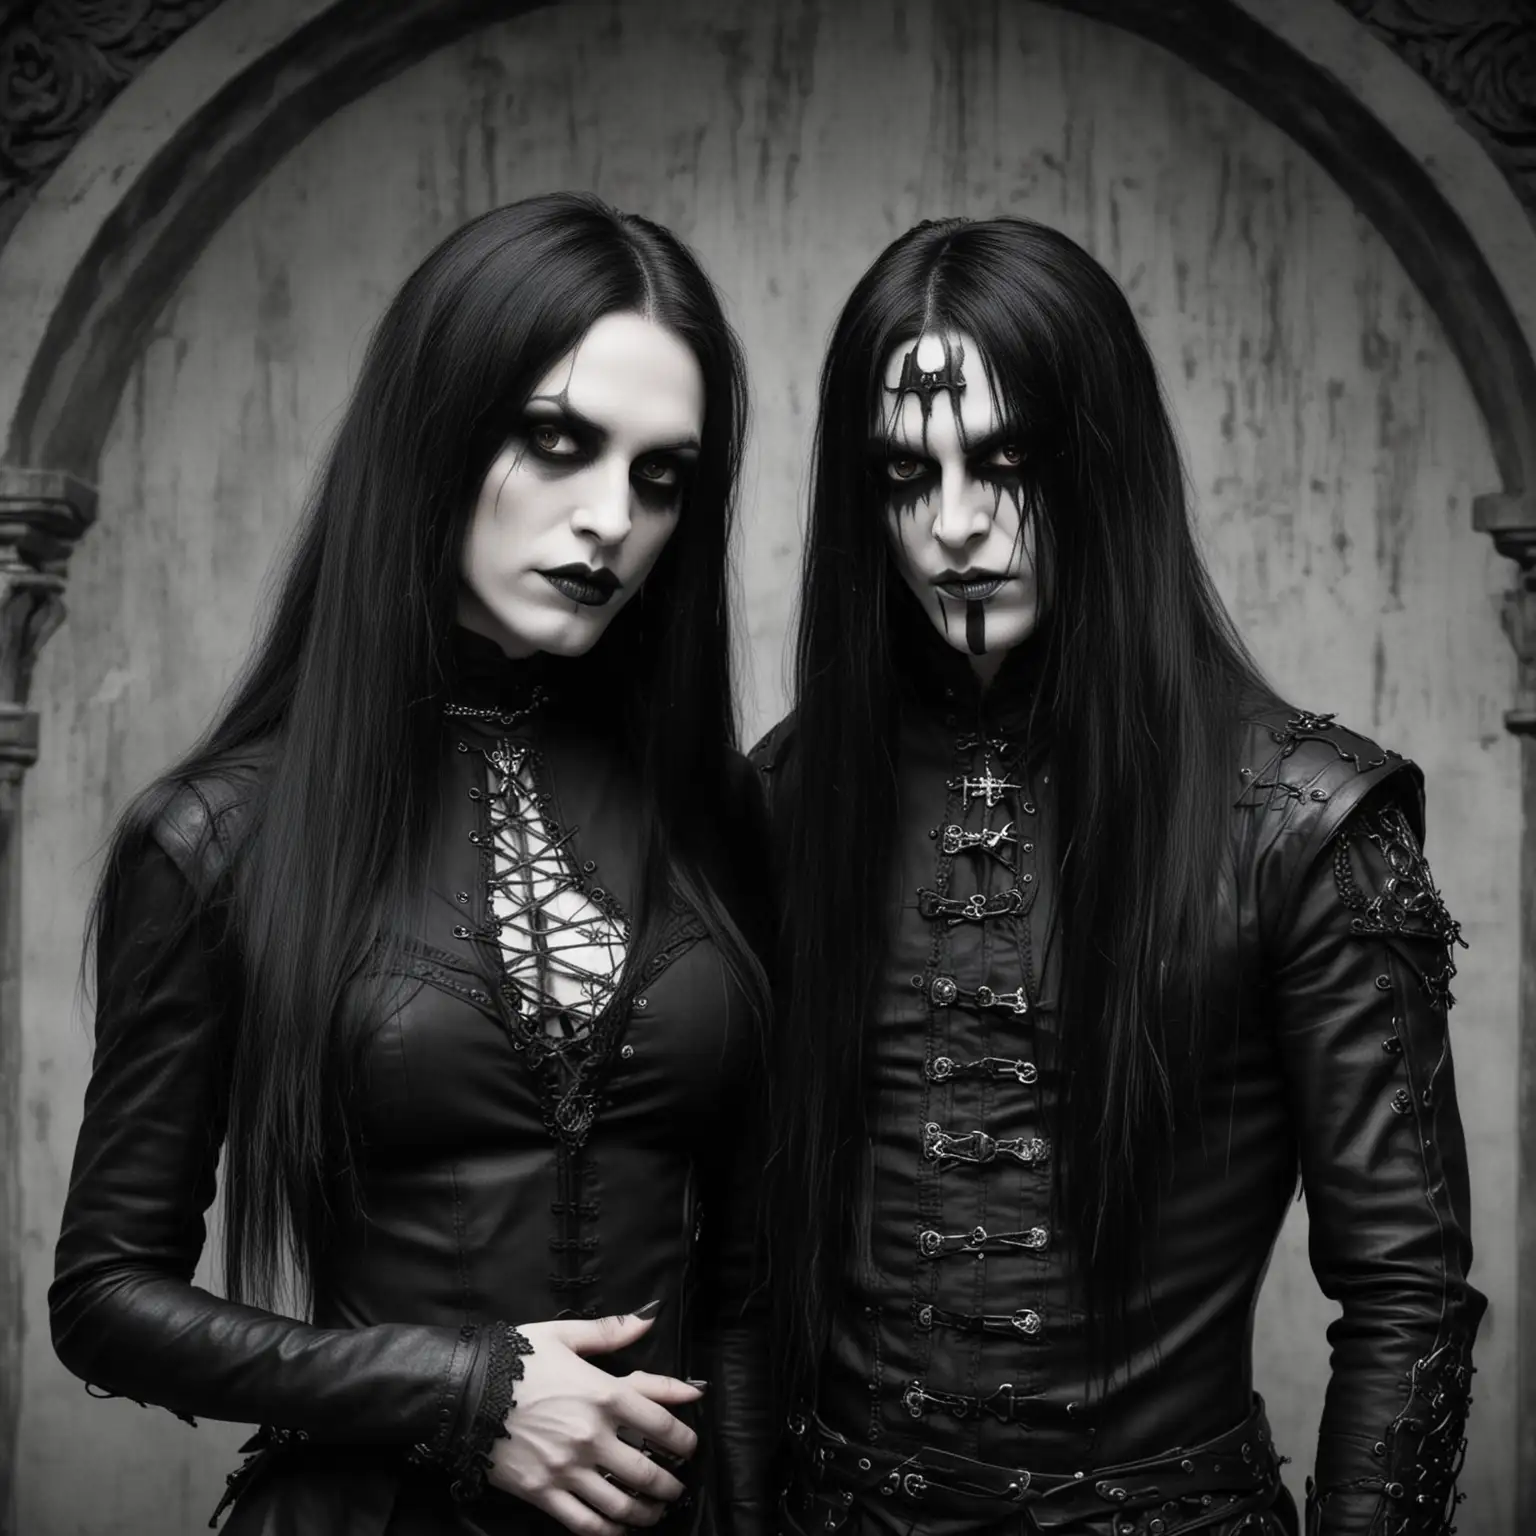 A blackmetalhead man and a gothic woman, both have long black hair. The image should be inspire by 50 Shades of gray and BDSM Aestethis.